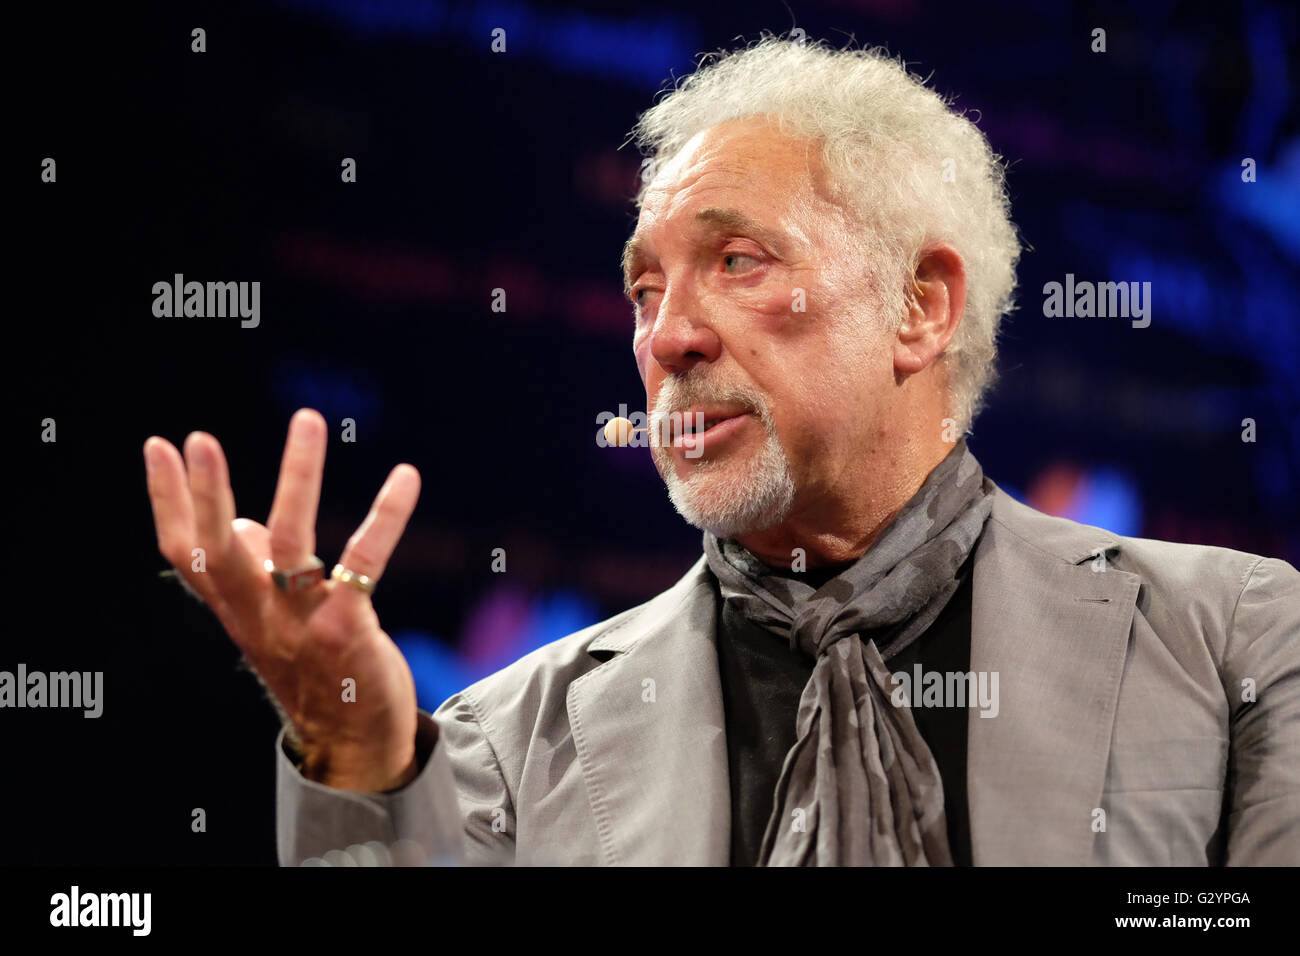 Hay Festival, Wales, UK - Sunday 5th June 2016 -  Tom Jones on stage at the Hay Festival before a sell out audience to talk about his life and his book Over the Top and Back. This was Tom's first public appearance since the recent death of his wife. At times Tom found the event quiet emotional as he recalled his wife and early life. Today is the final day of the eleven day literary and arts festival. Photograph Steven May / Alamy Live News Stock Photo